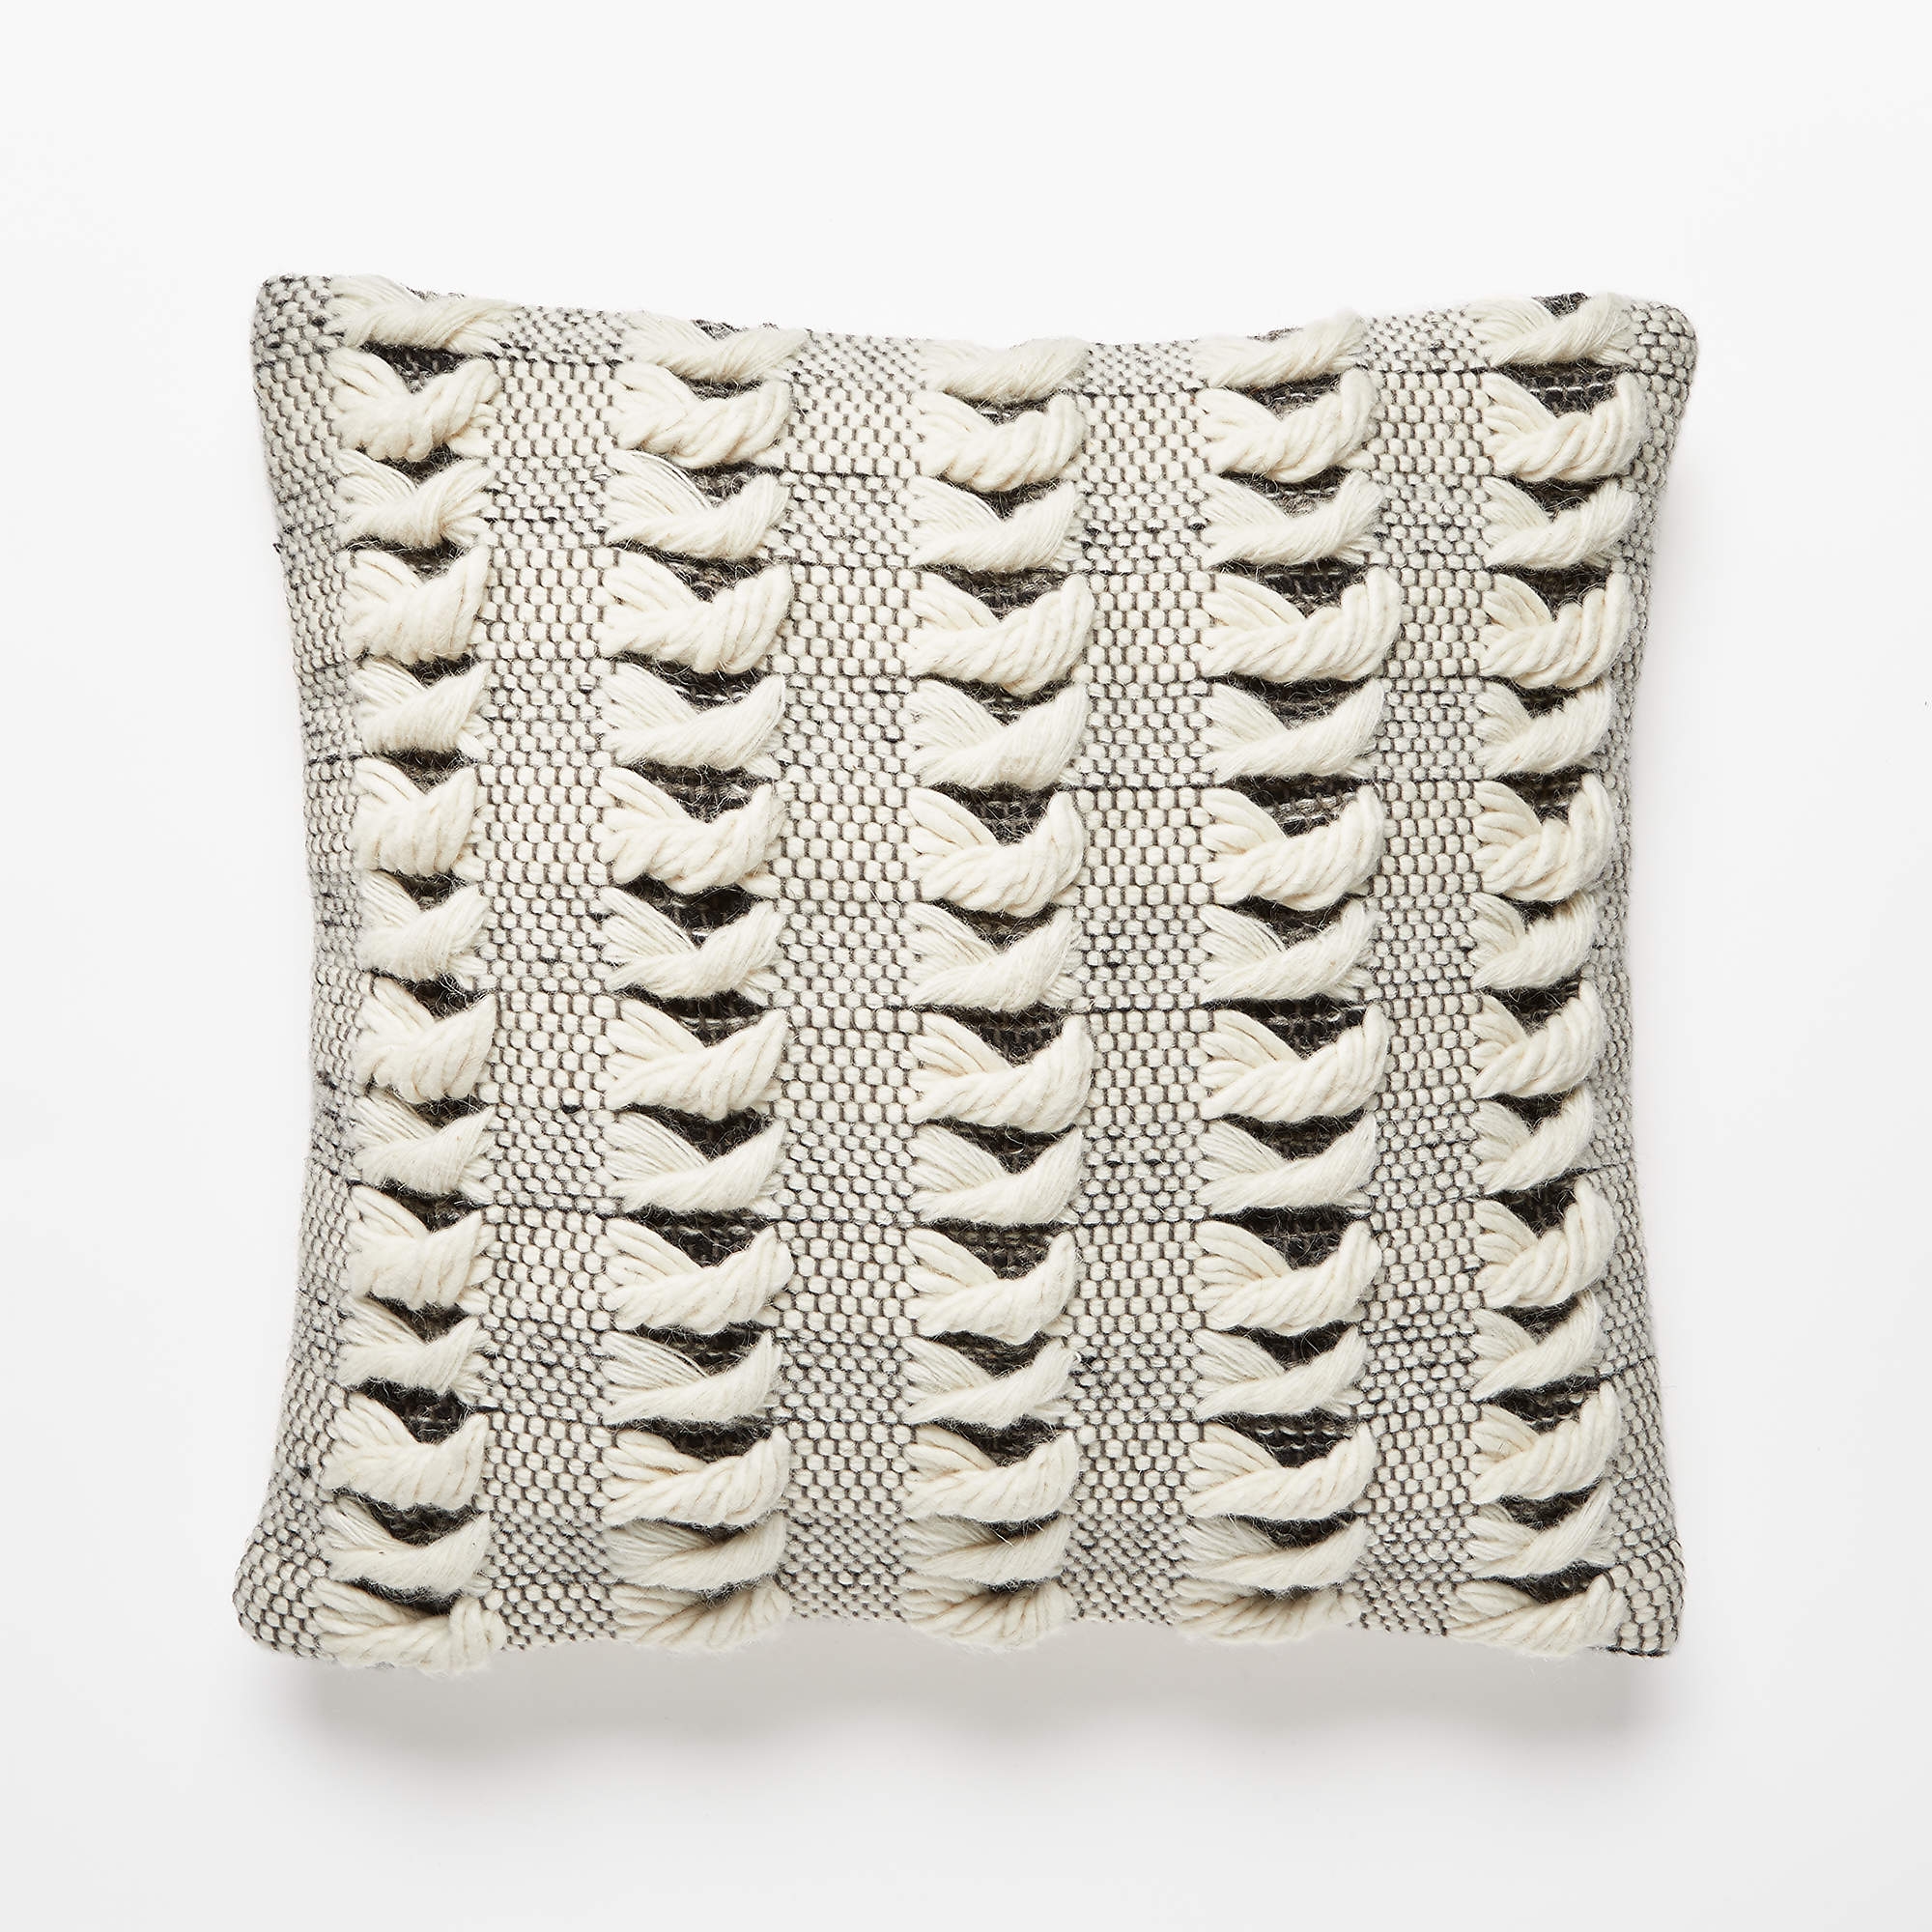 Simon Ivory White Wool Throw Pillow with Feather-Down Insert 20" - Image 0